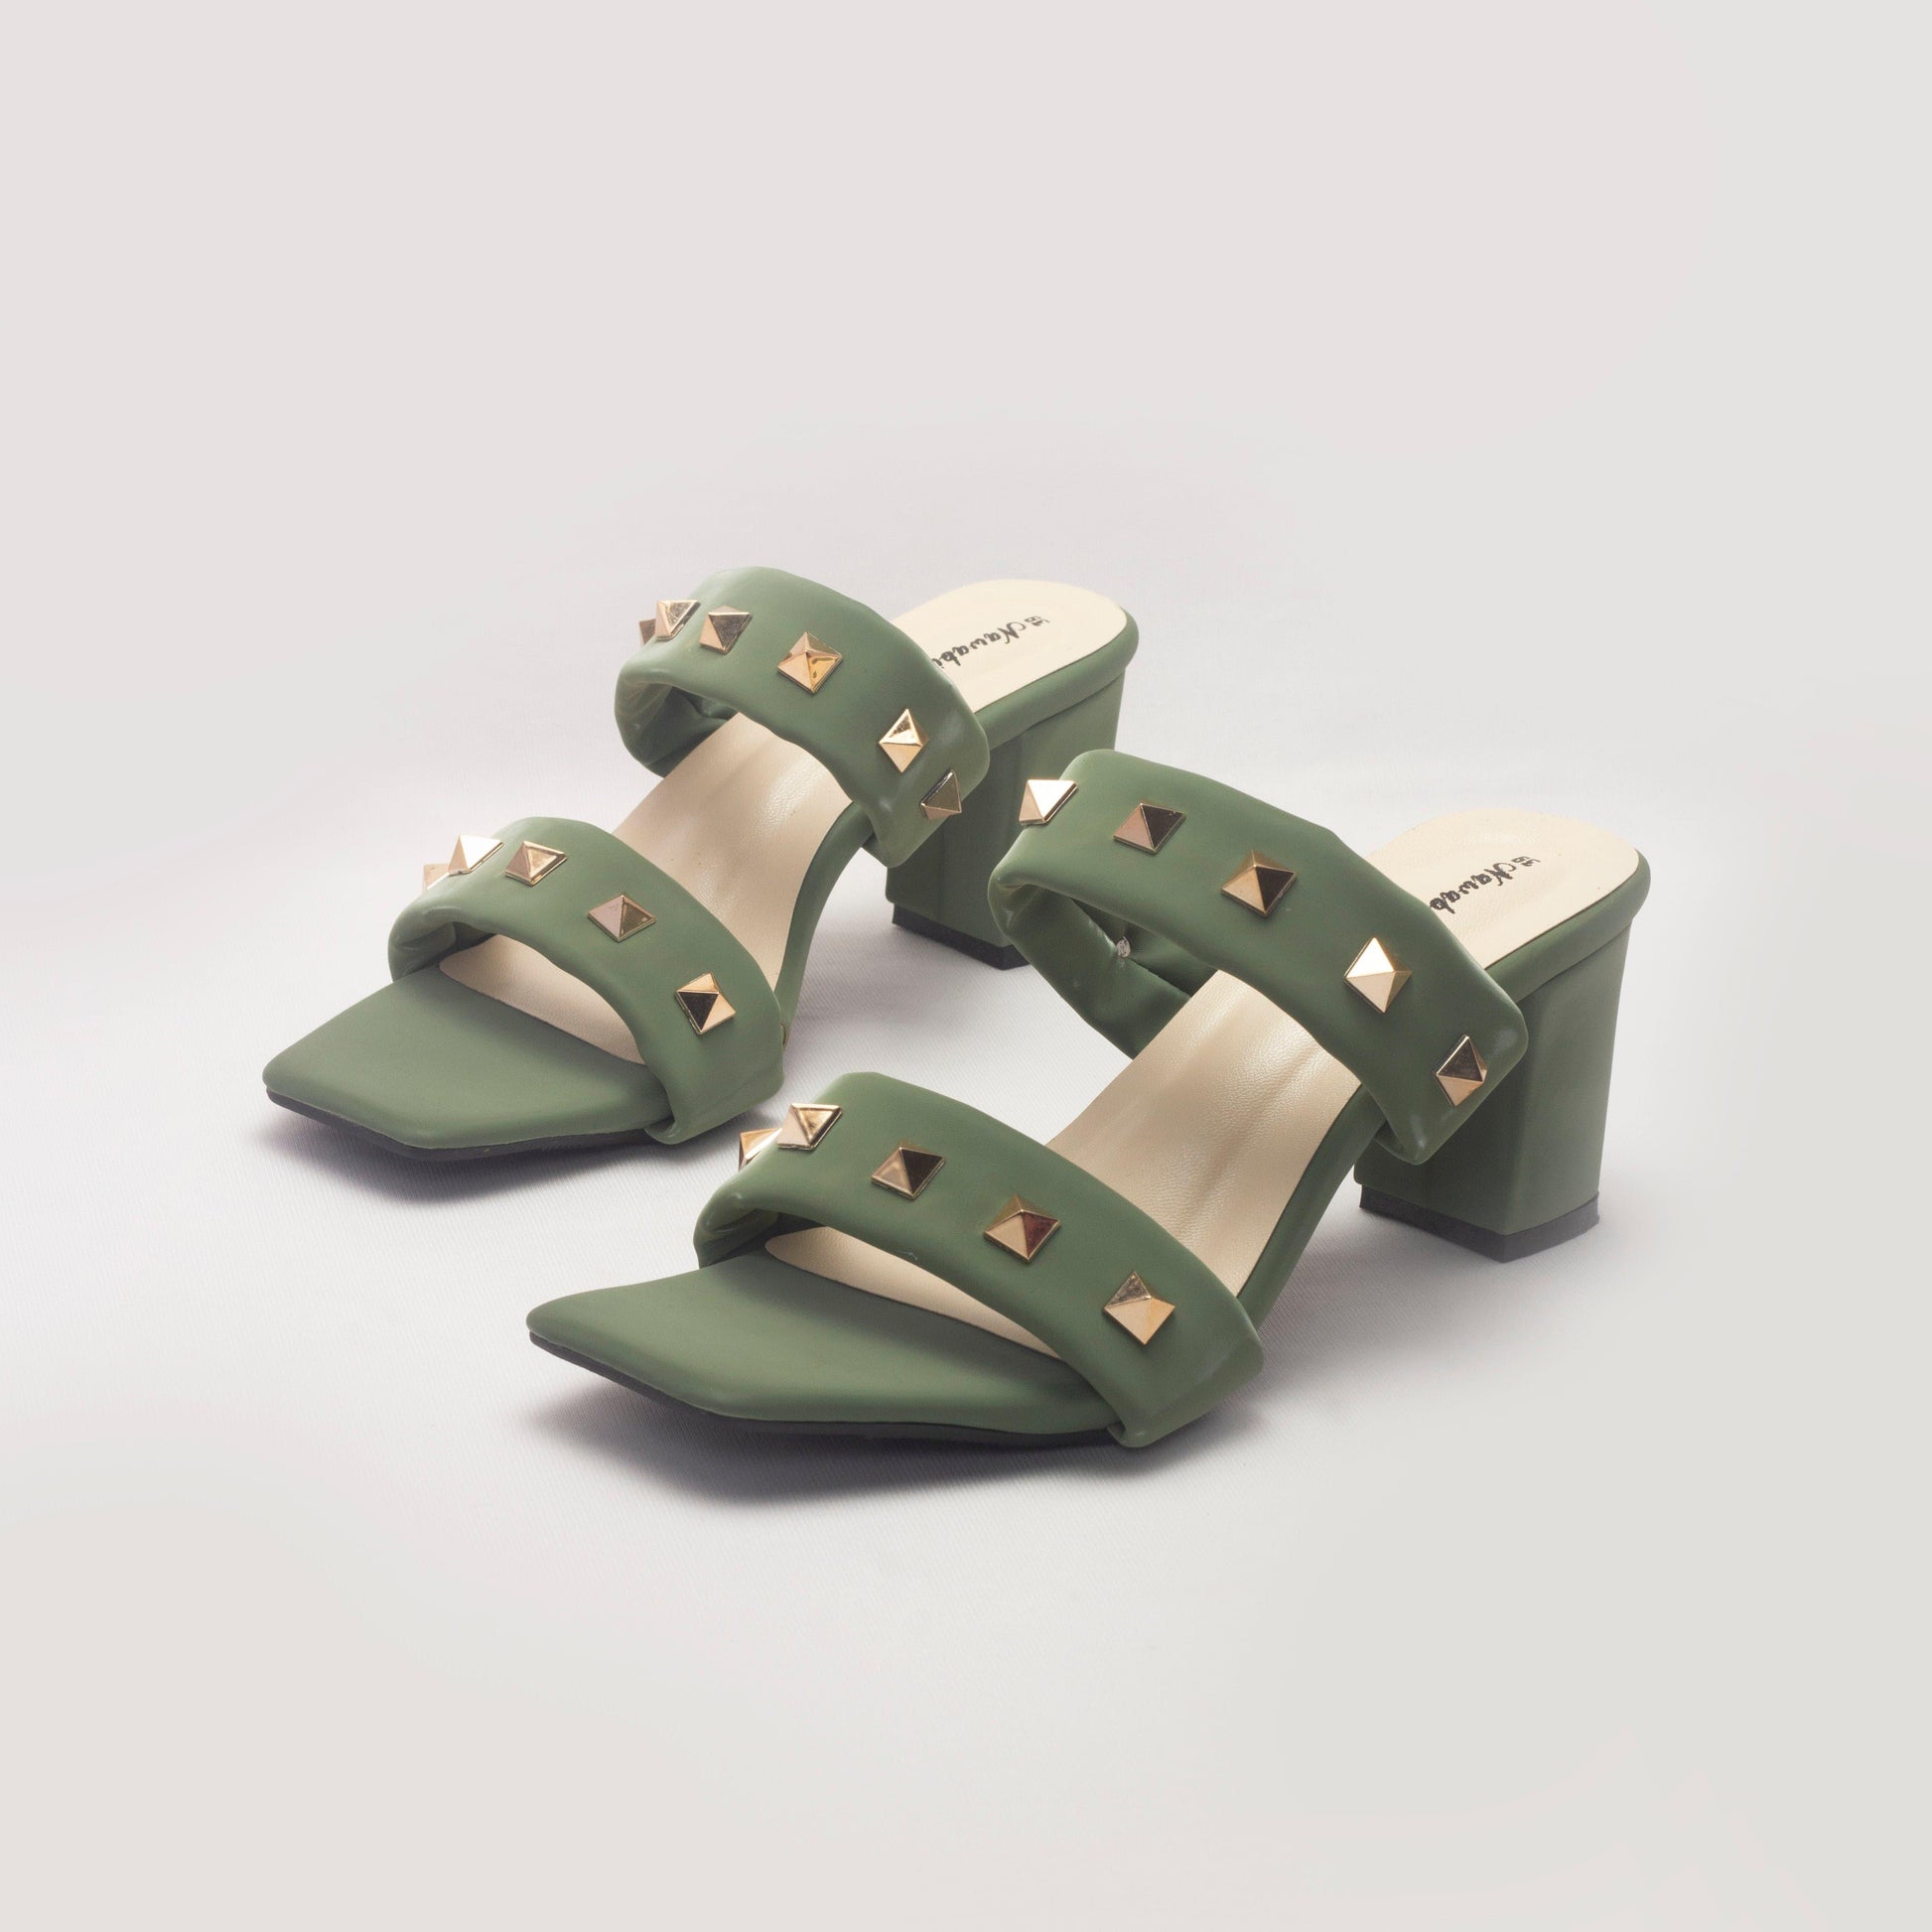 Nawabi Shoes BD Shoes 35 / green Stylish and Versatile: Block Heels for Any Occasion